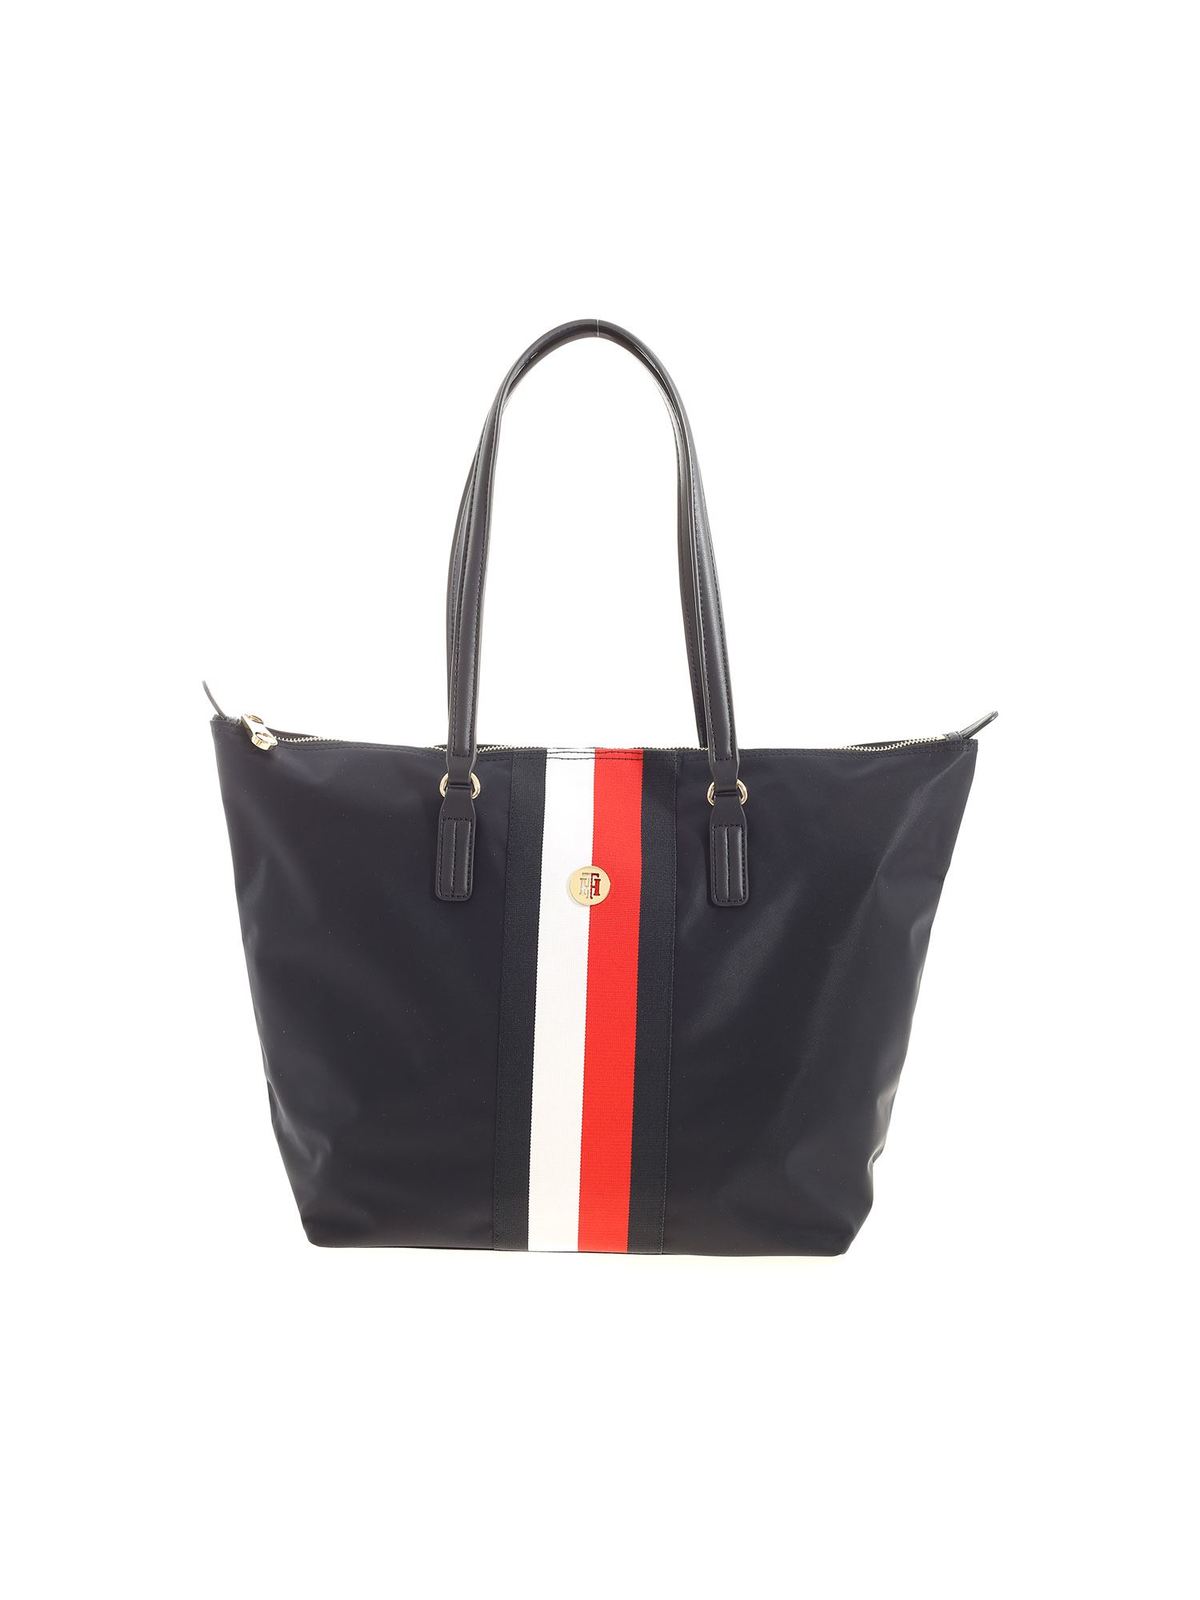 Totes bags Tommy Hilfiger - Poppy shopping bag blue -